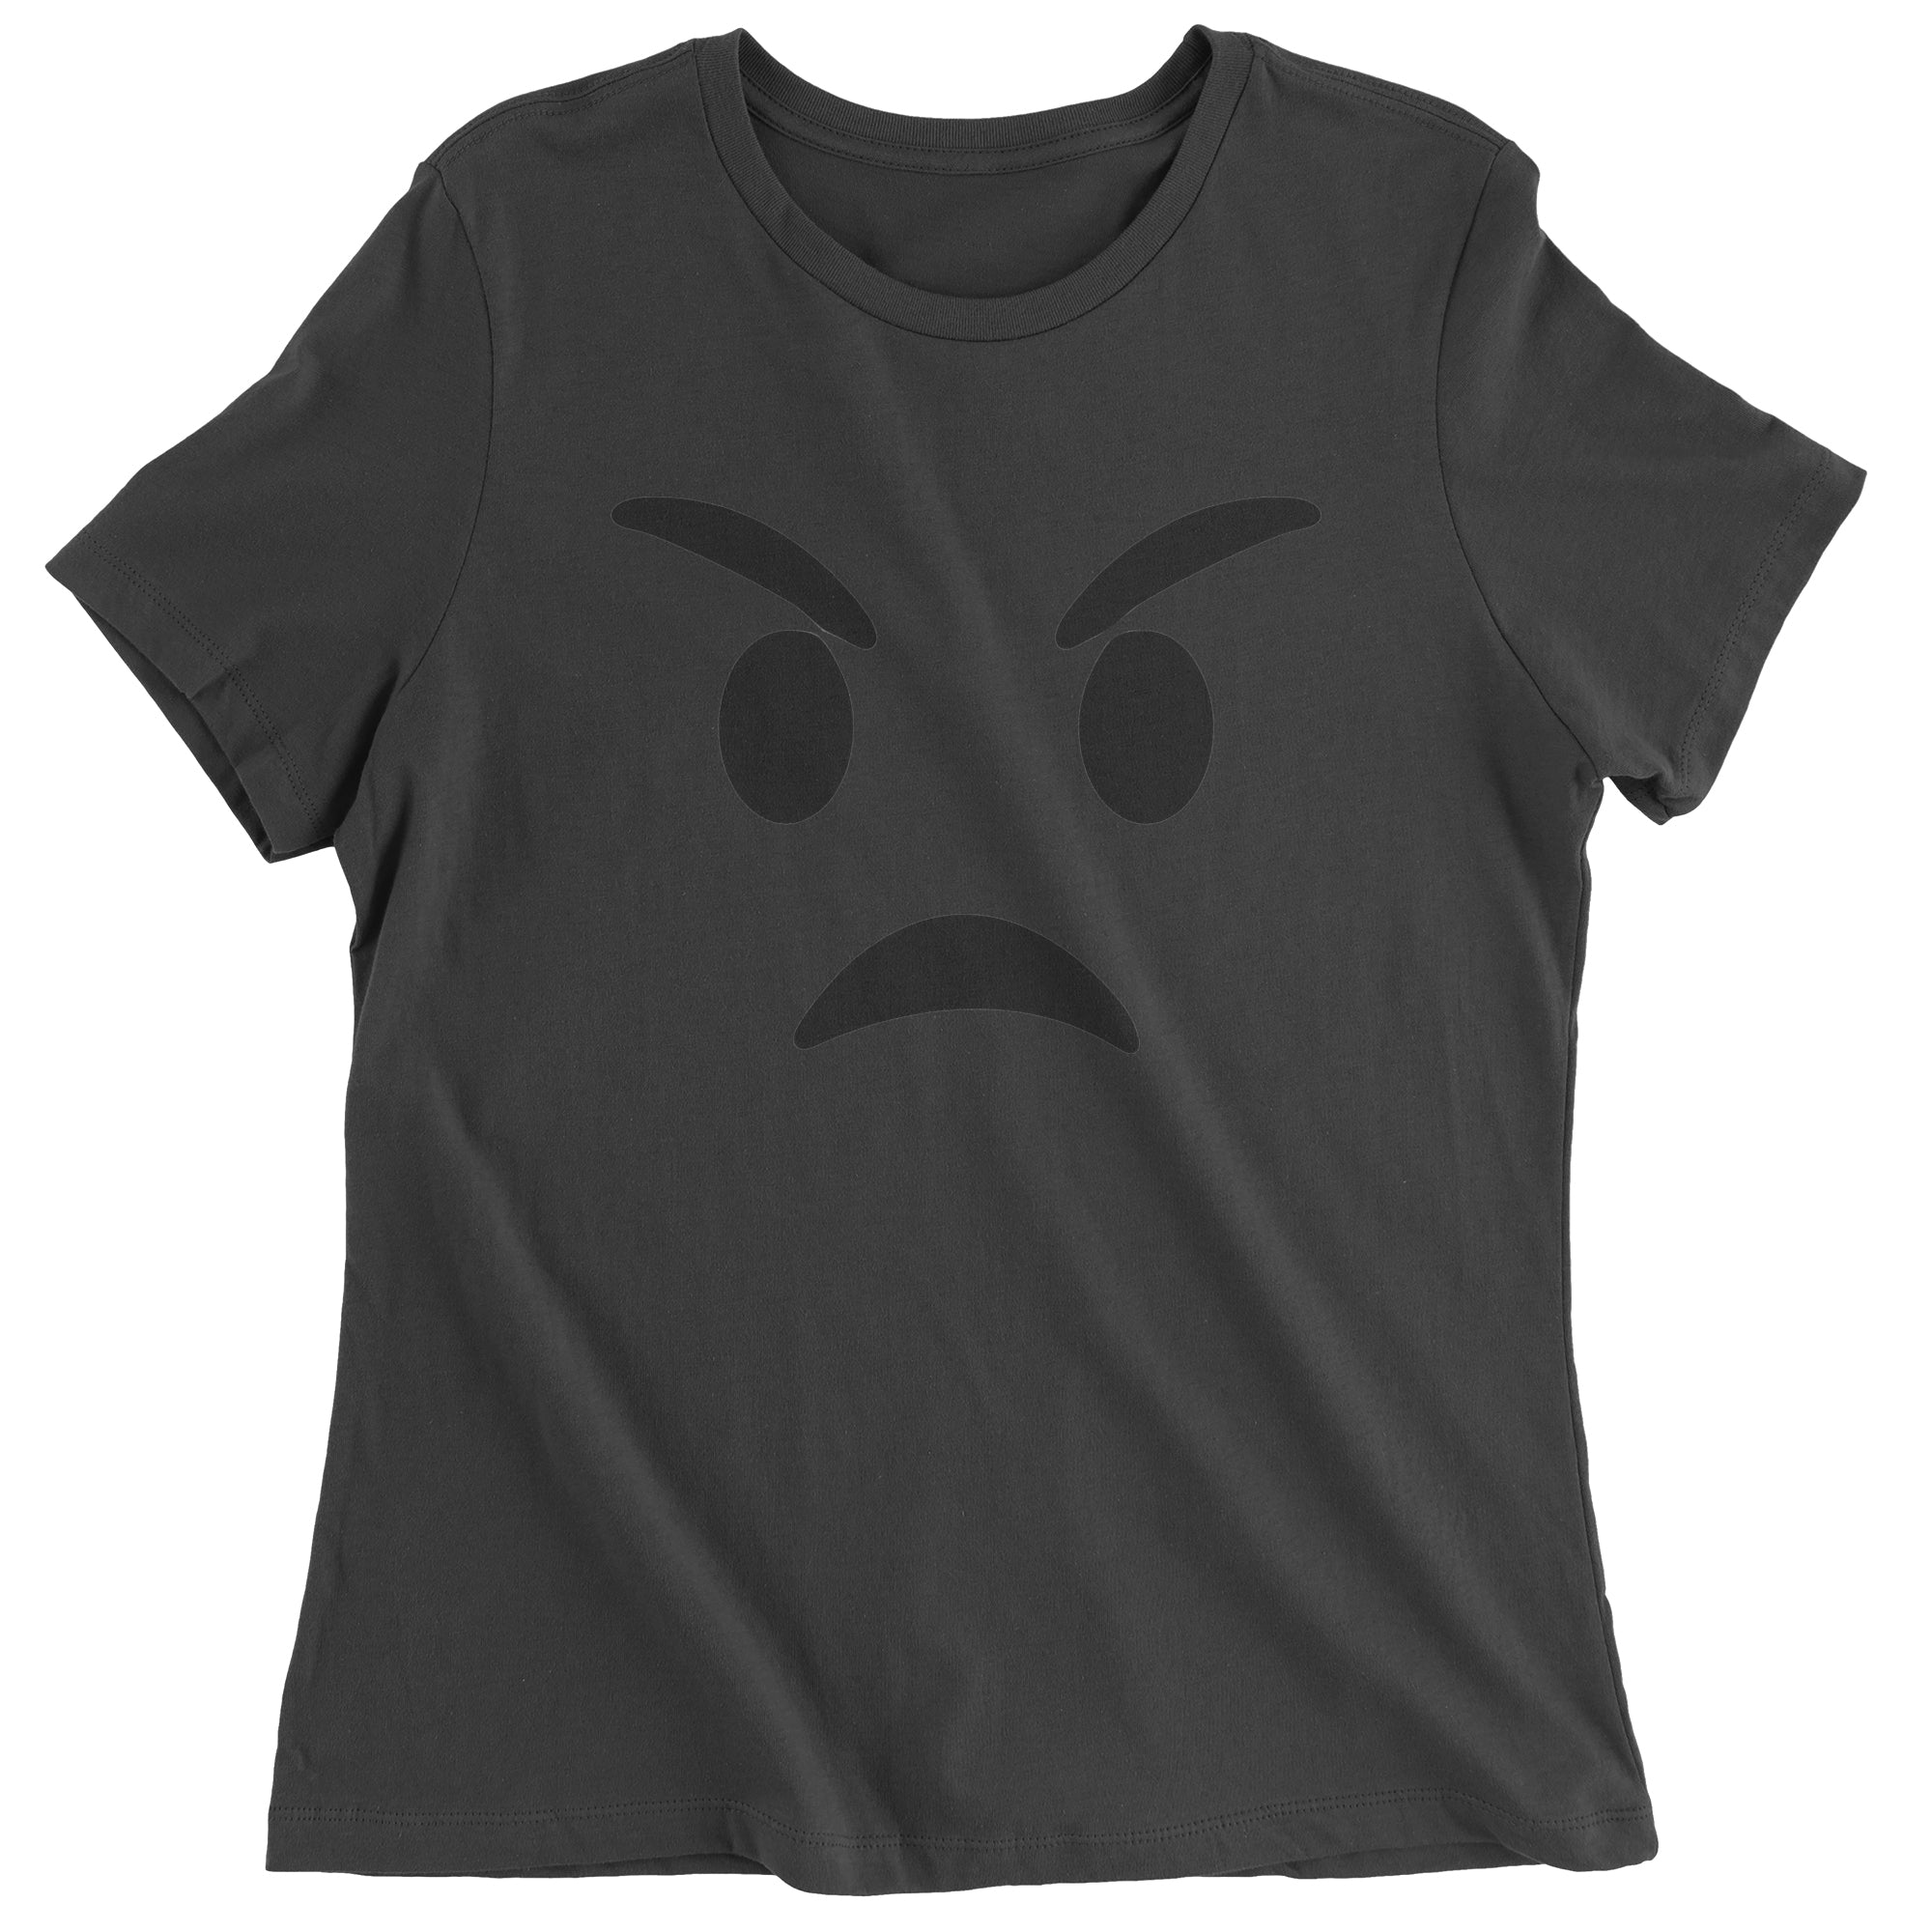 Emoticon Mad Angry Mad Funn Women's T-Shirt